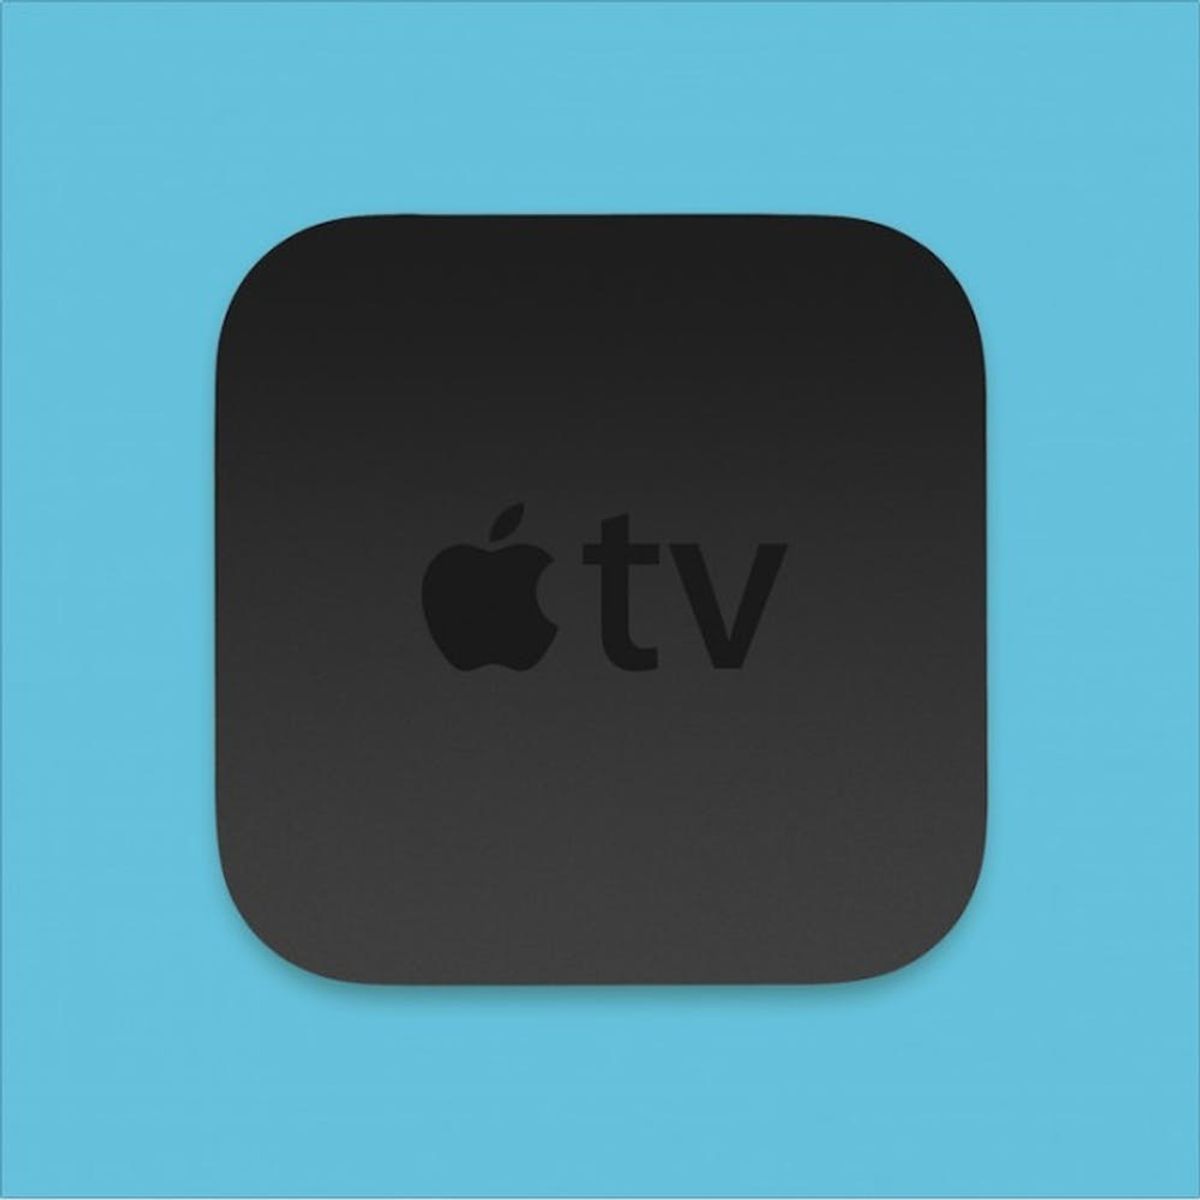 The Apple TV iOS App Kills “What Should We Watch?”